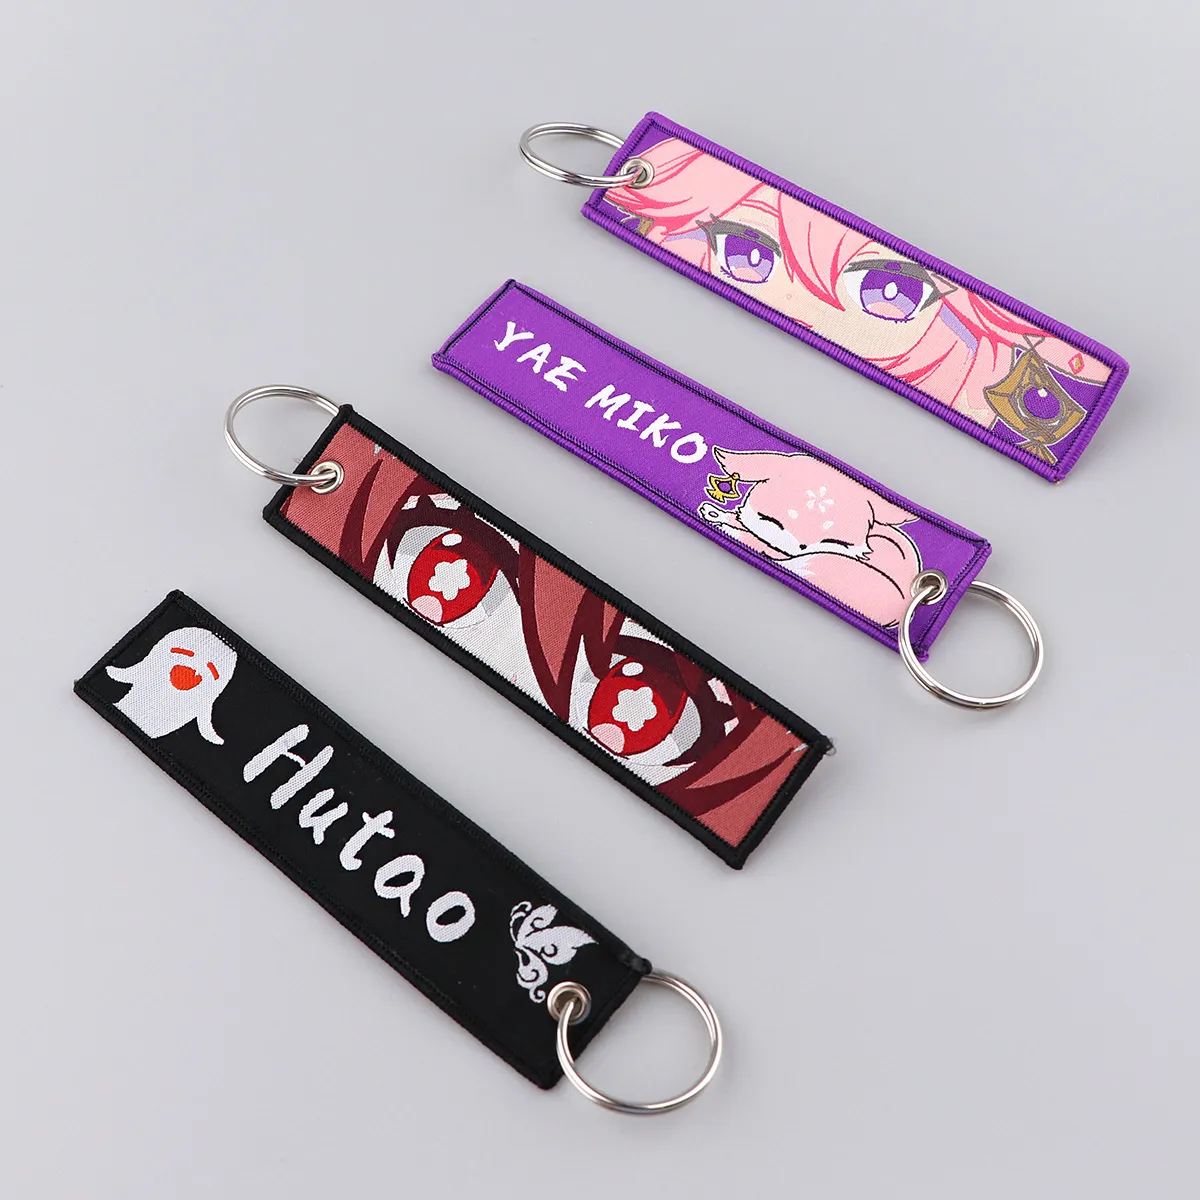 Keychains & Lanyards Various Types Of Cartoon Cool Key Tag Embroidery Fobs For Motorcycles Cars Bag Backpack Keychain Fashion Ring Gi Otvd6